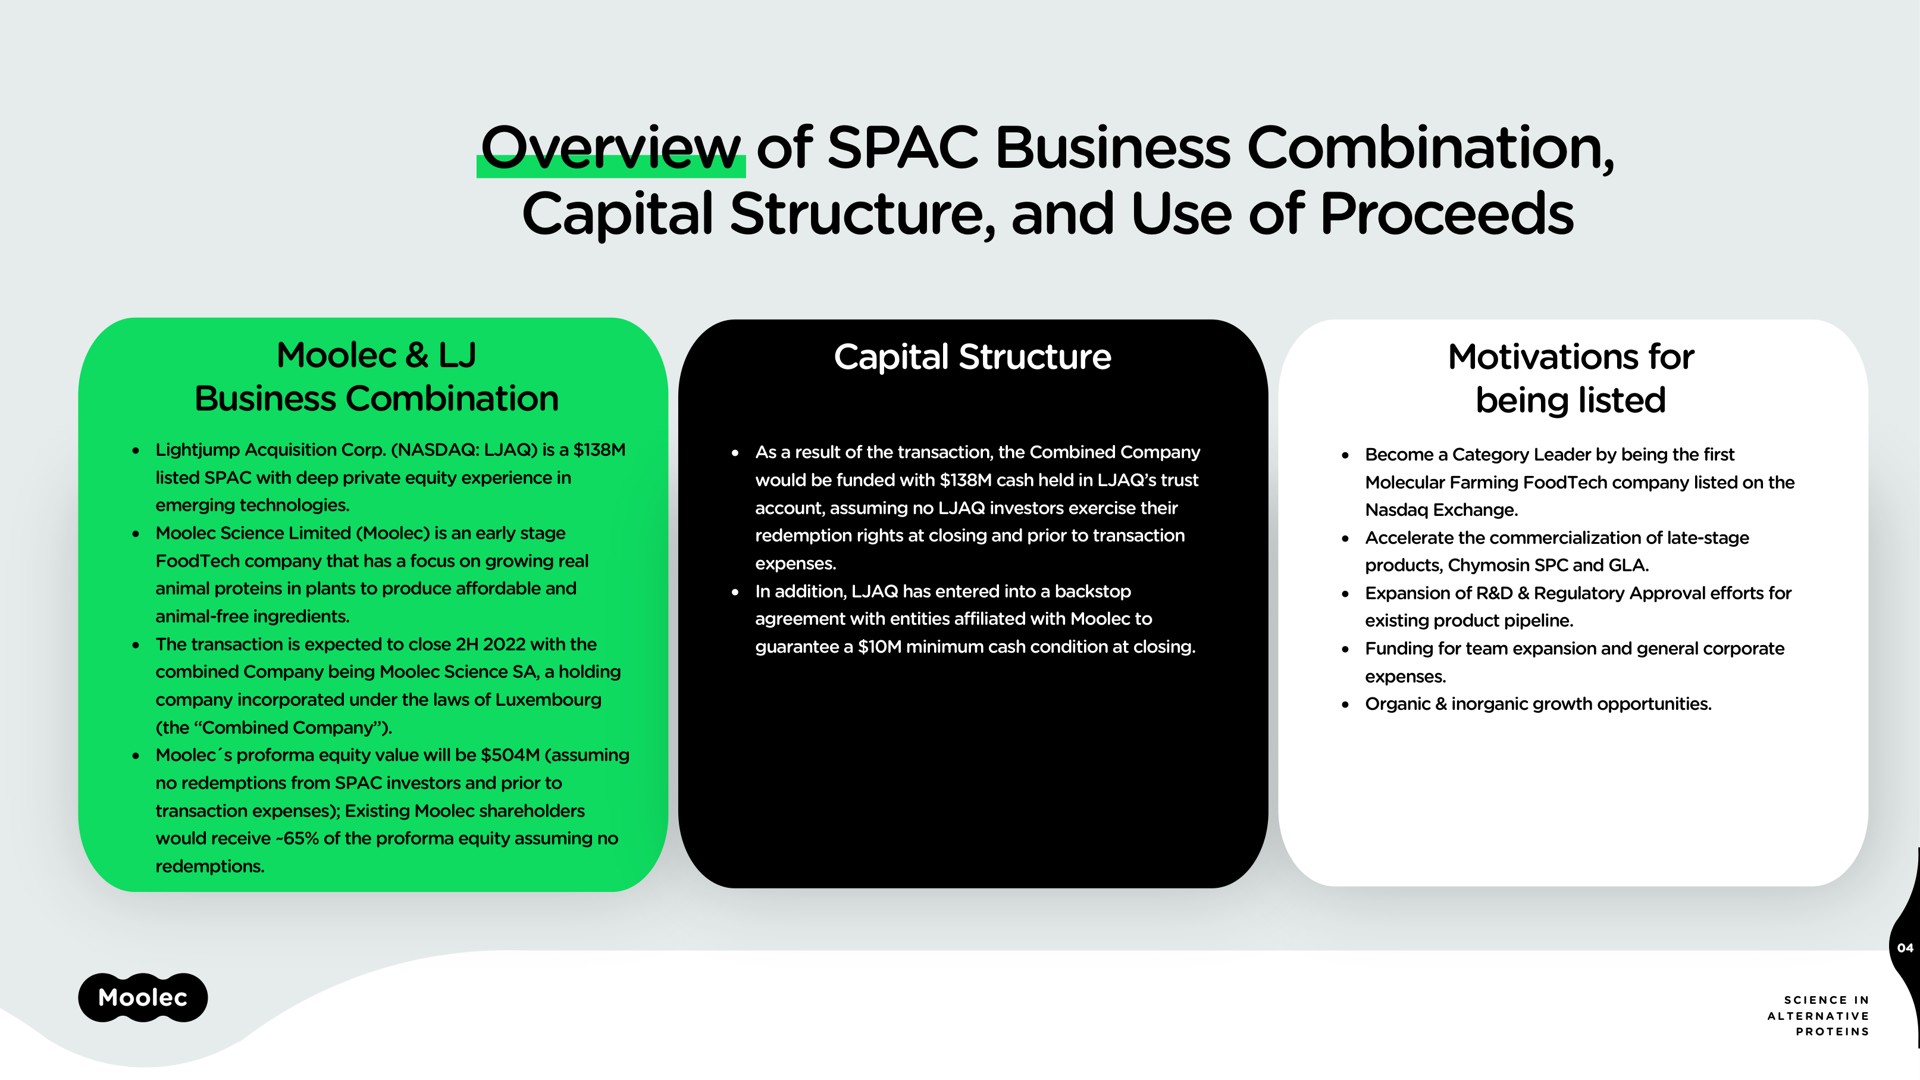 overview of business combination capital structure and use of proceeds | Moolec Science